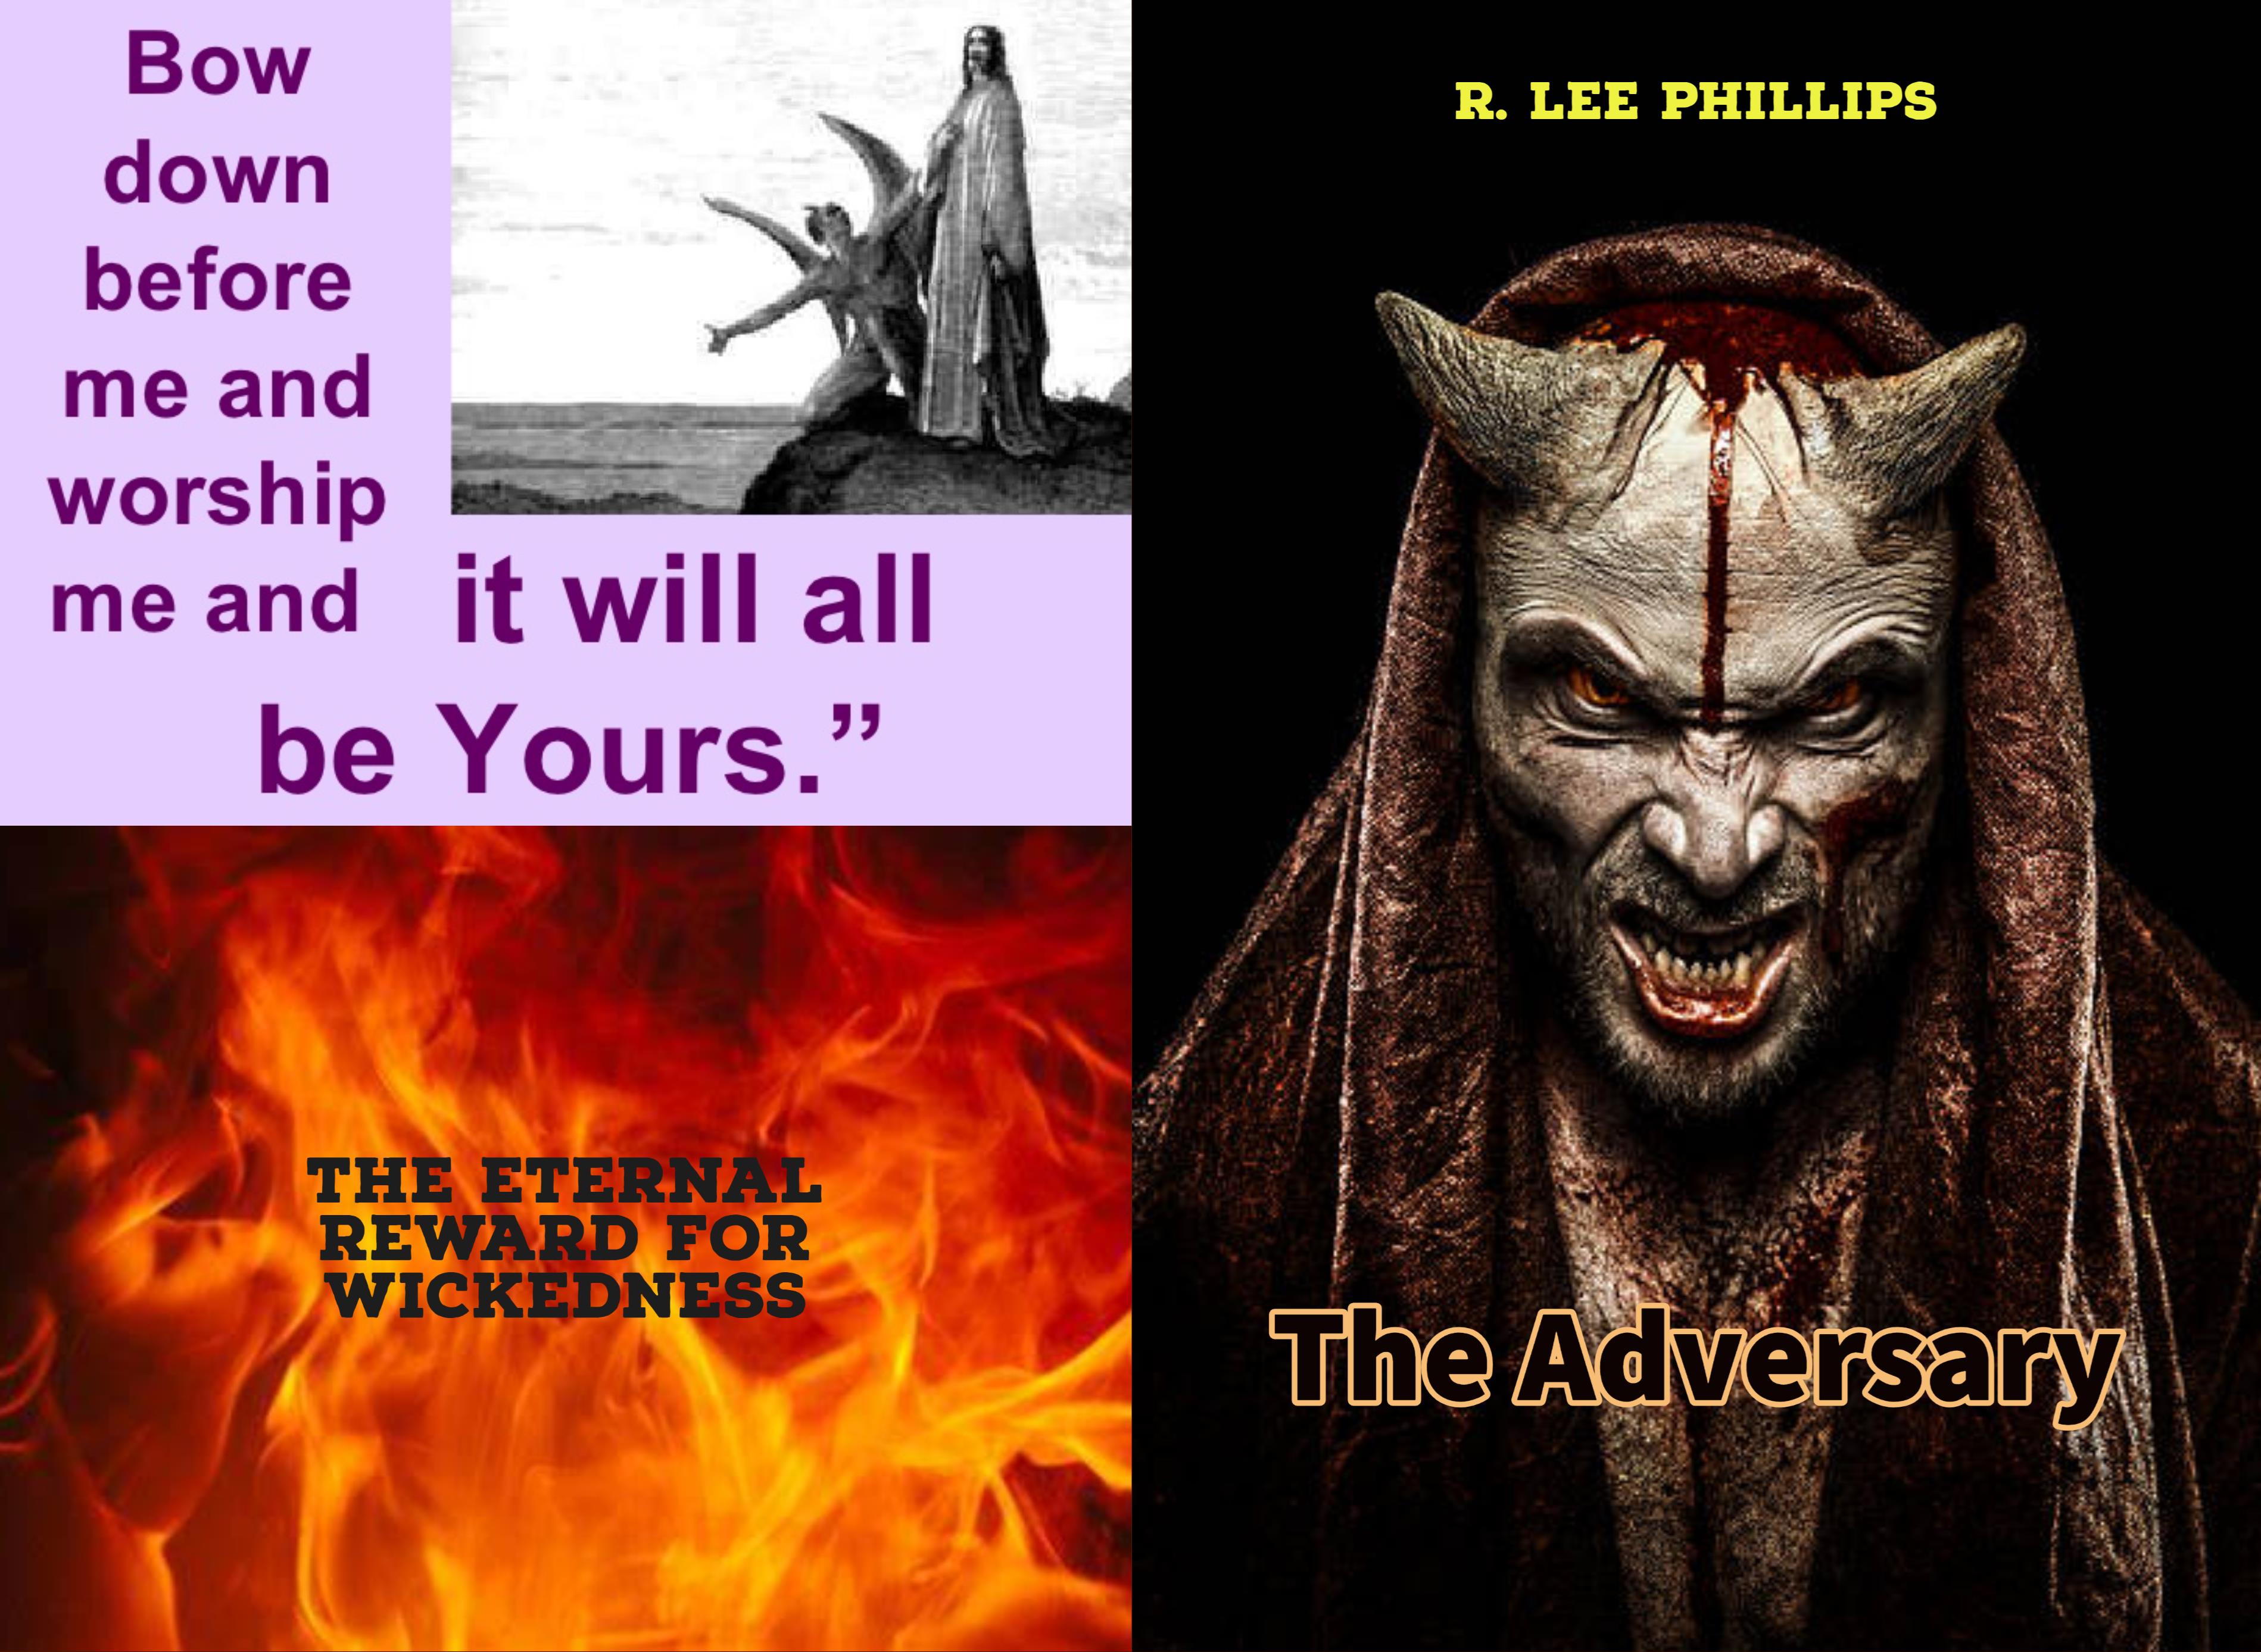 The Adversary cover image